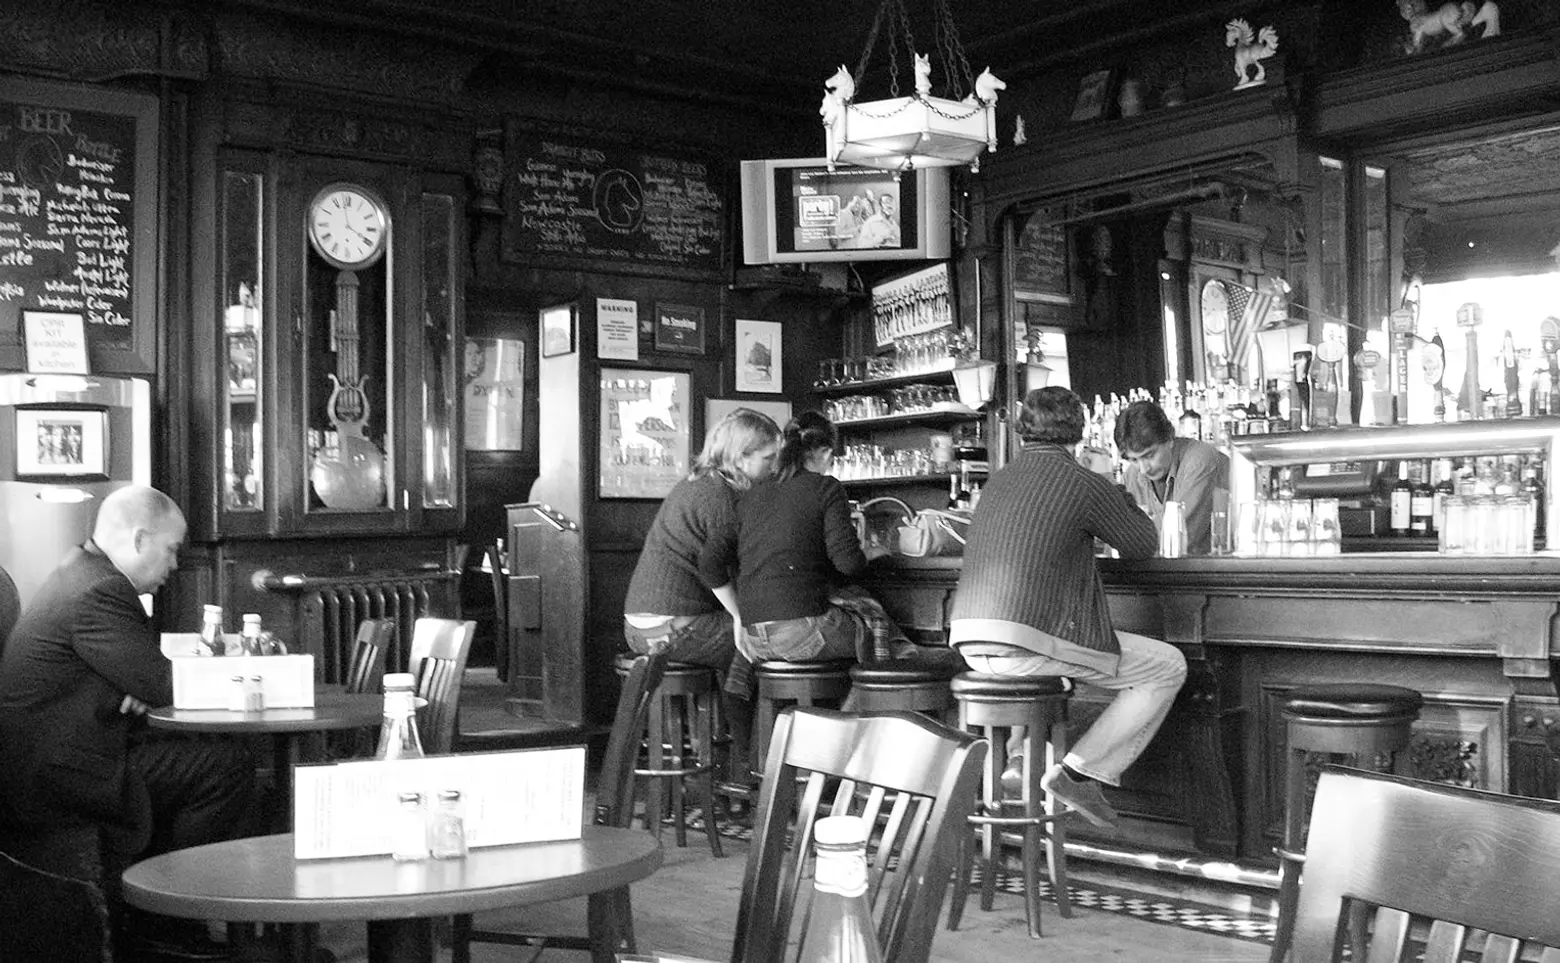 Cracking open the stories of NYC’s most historic bars